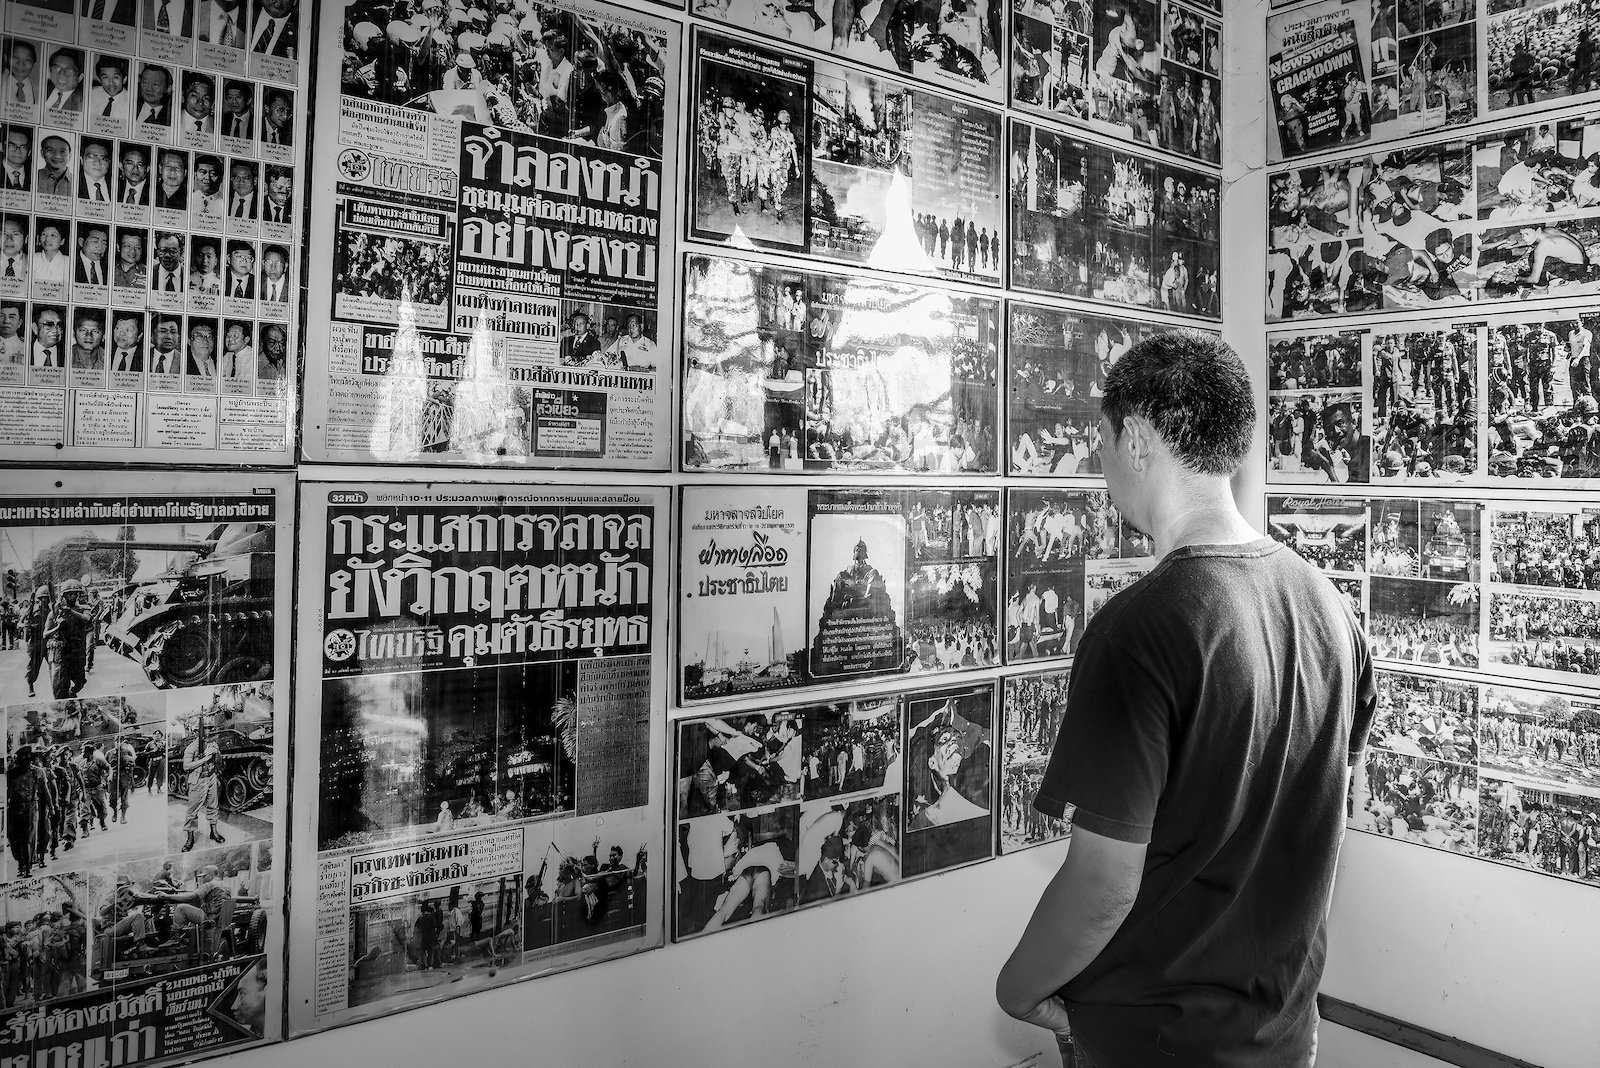 Thai Newspapers in a Museum - New Naratif